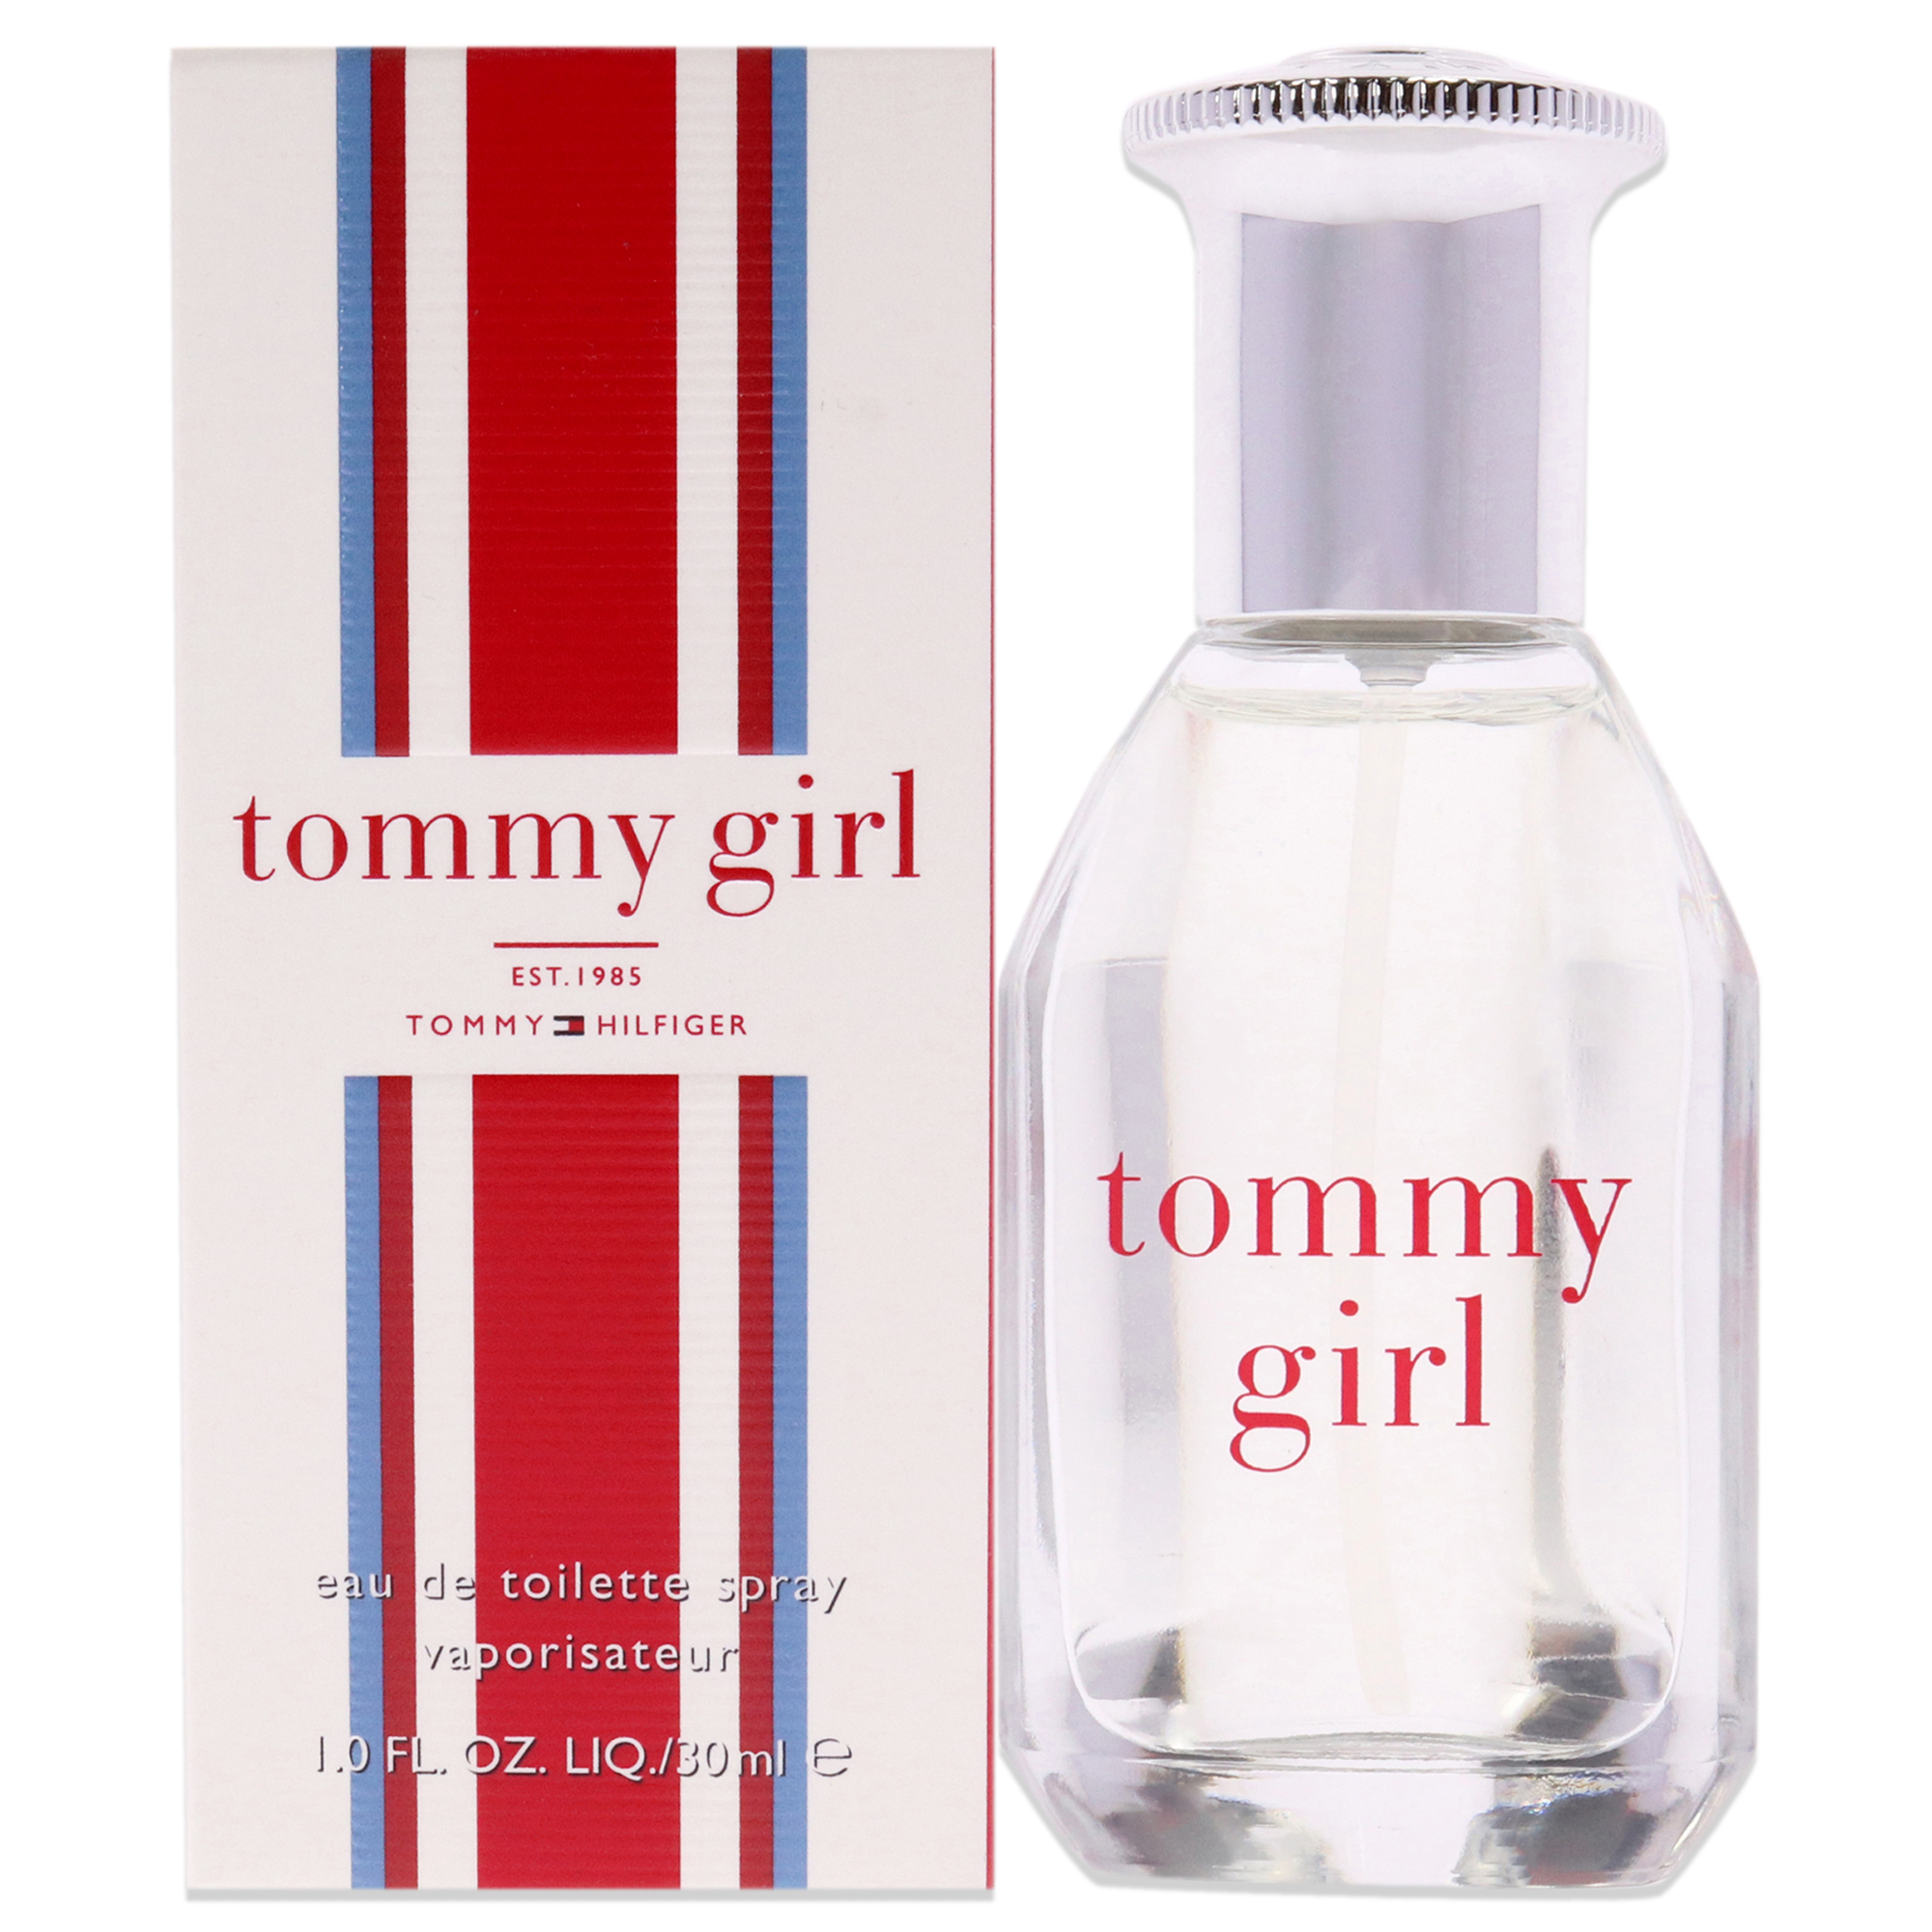 Tommy Girl by Tommy Hilfiger for Women - 1 oz EDT Spray...